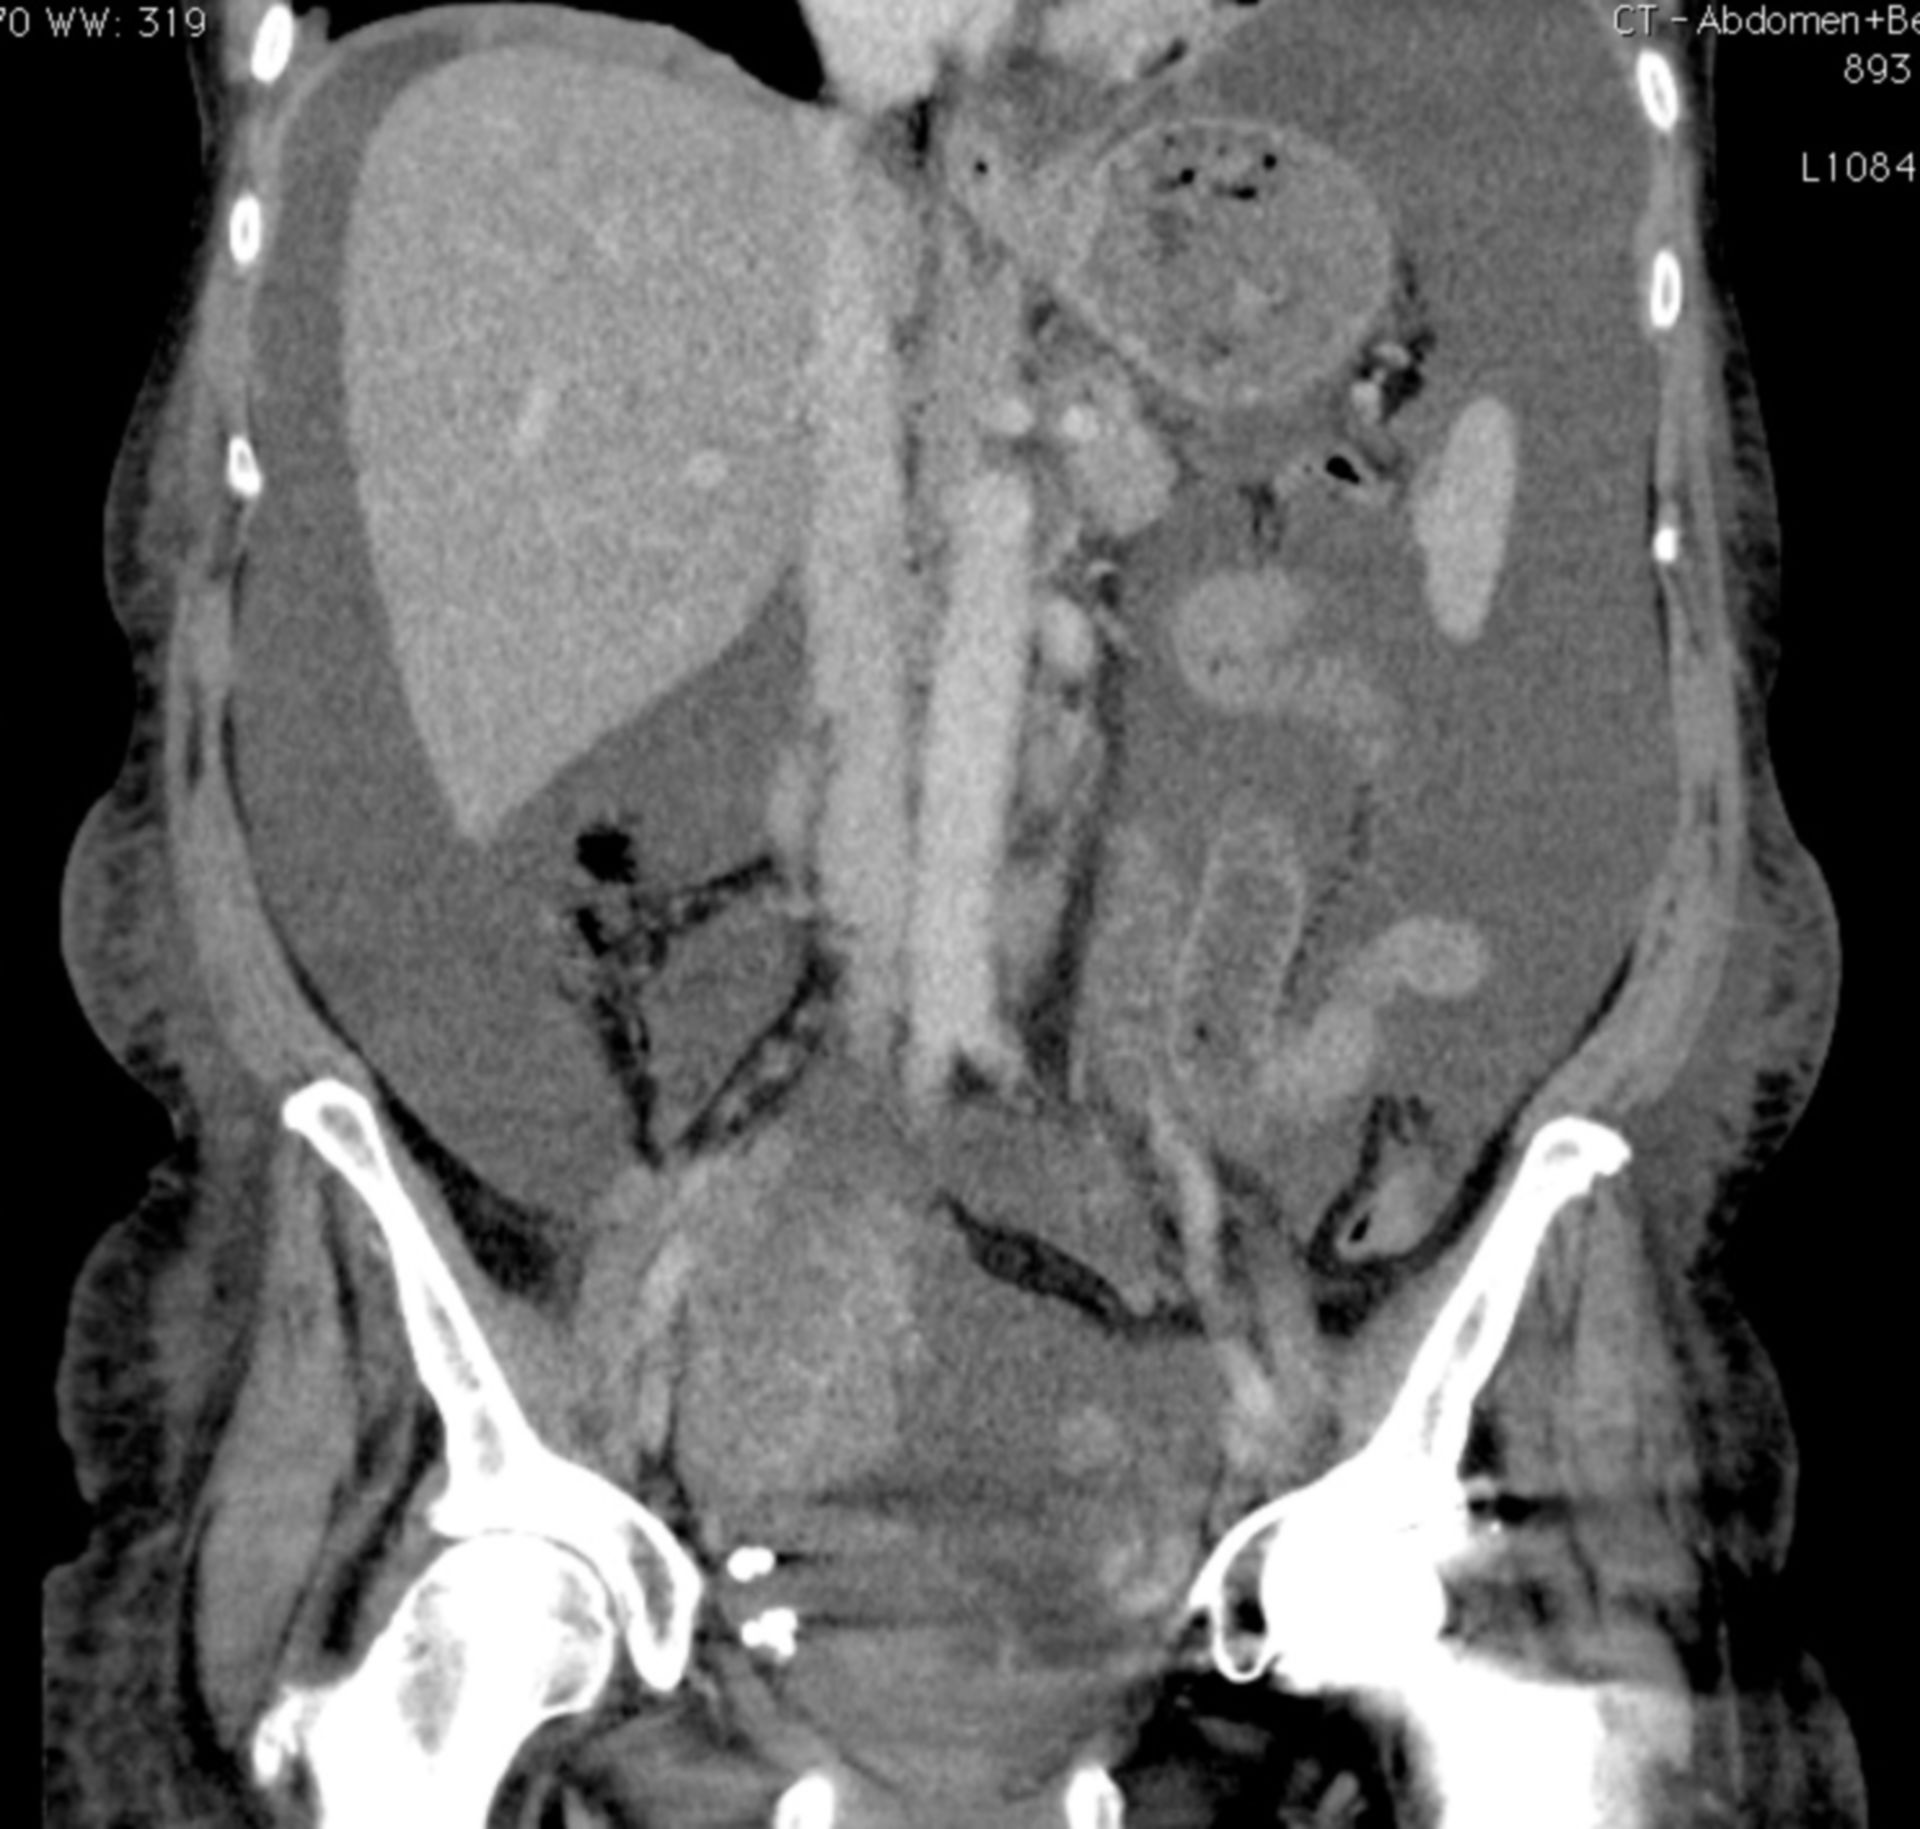 Ascites with suspicion of ovarian cancer